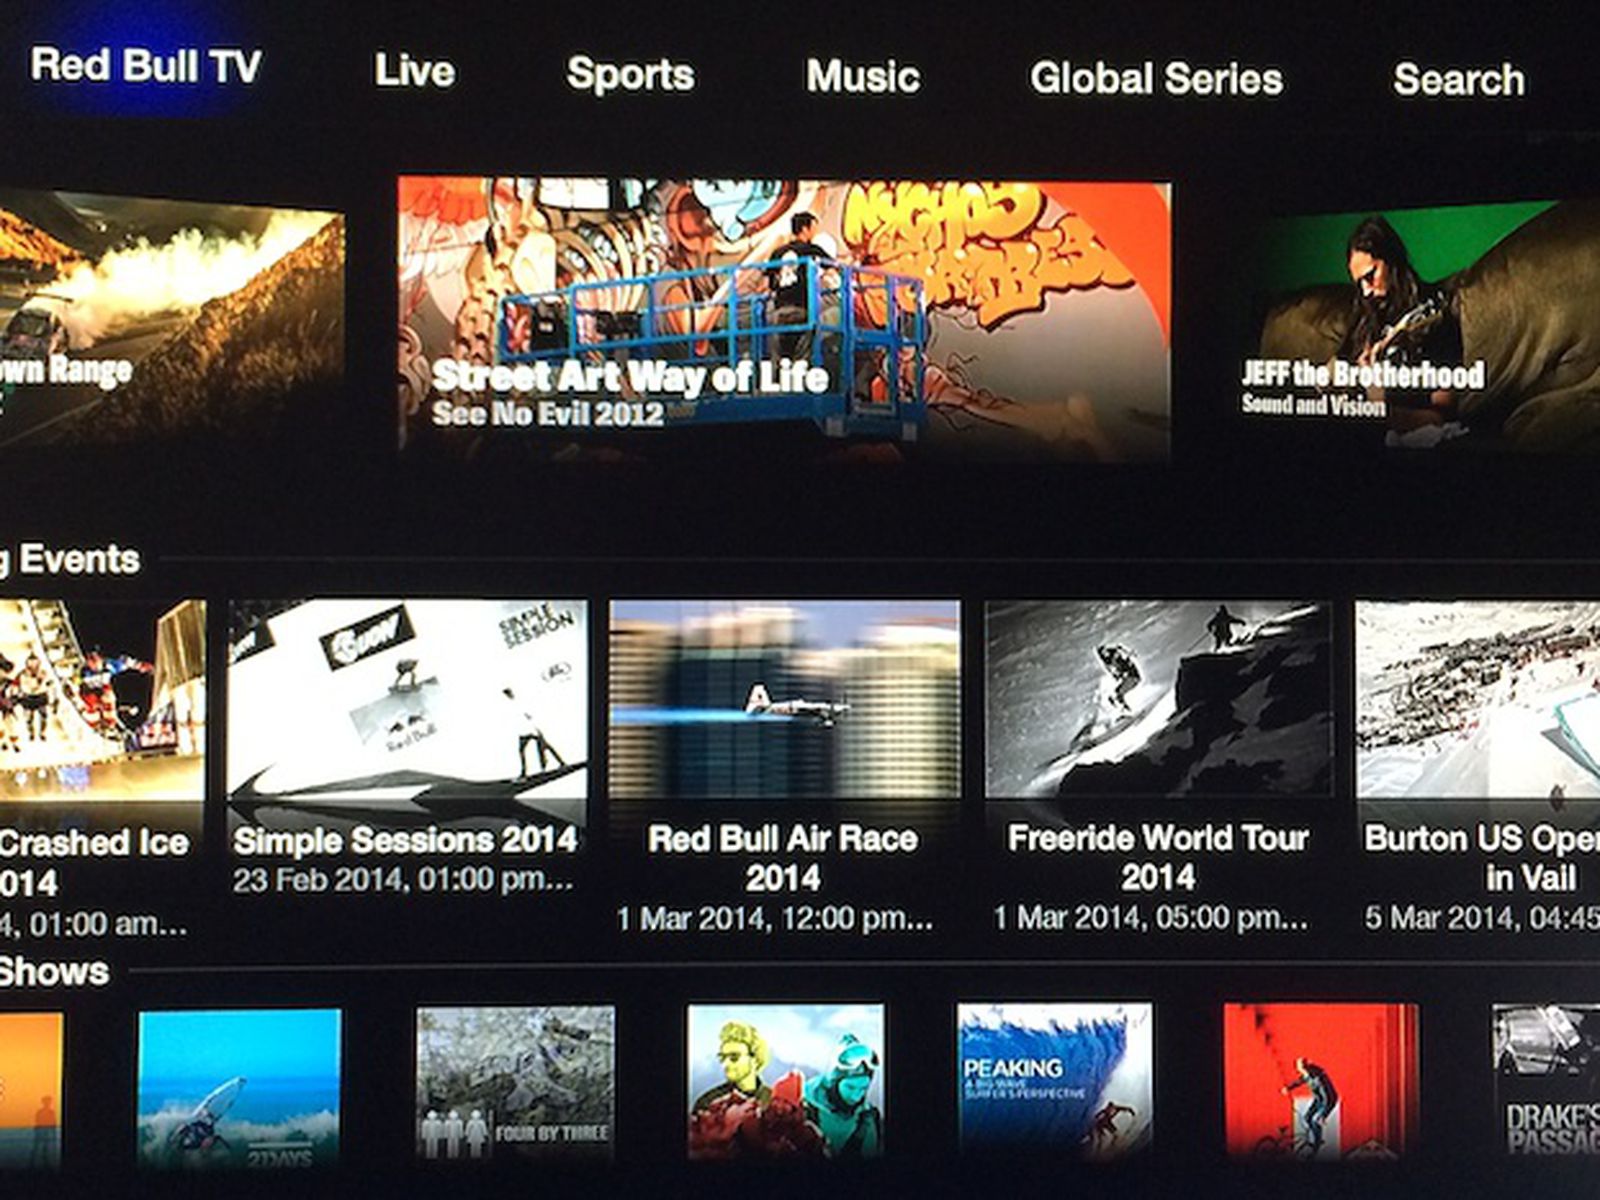 Apple Adds 'Red Bull TV' Action Sports Channel Apple TV - MacRumors